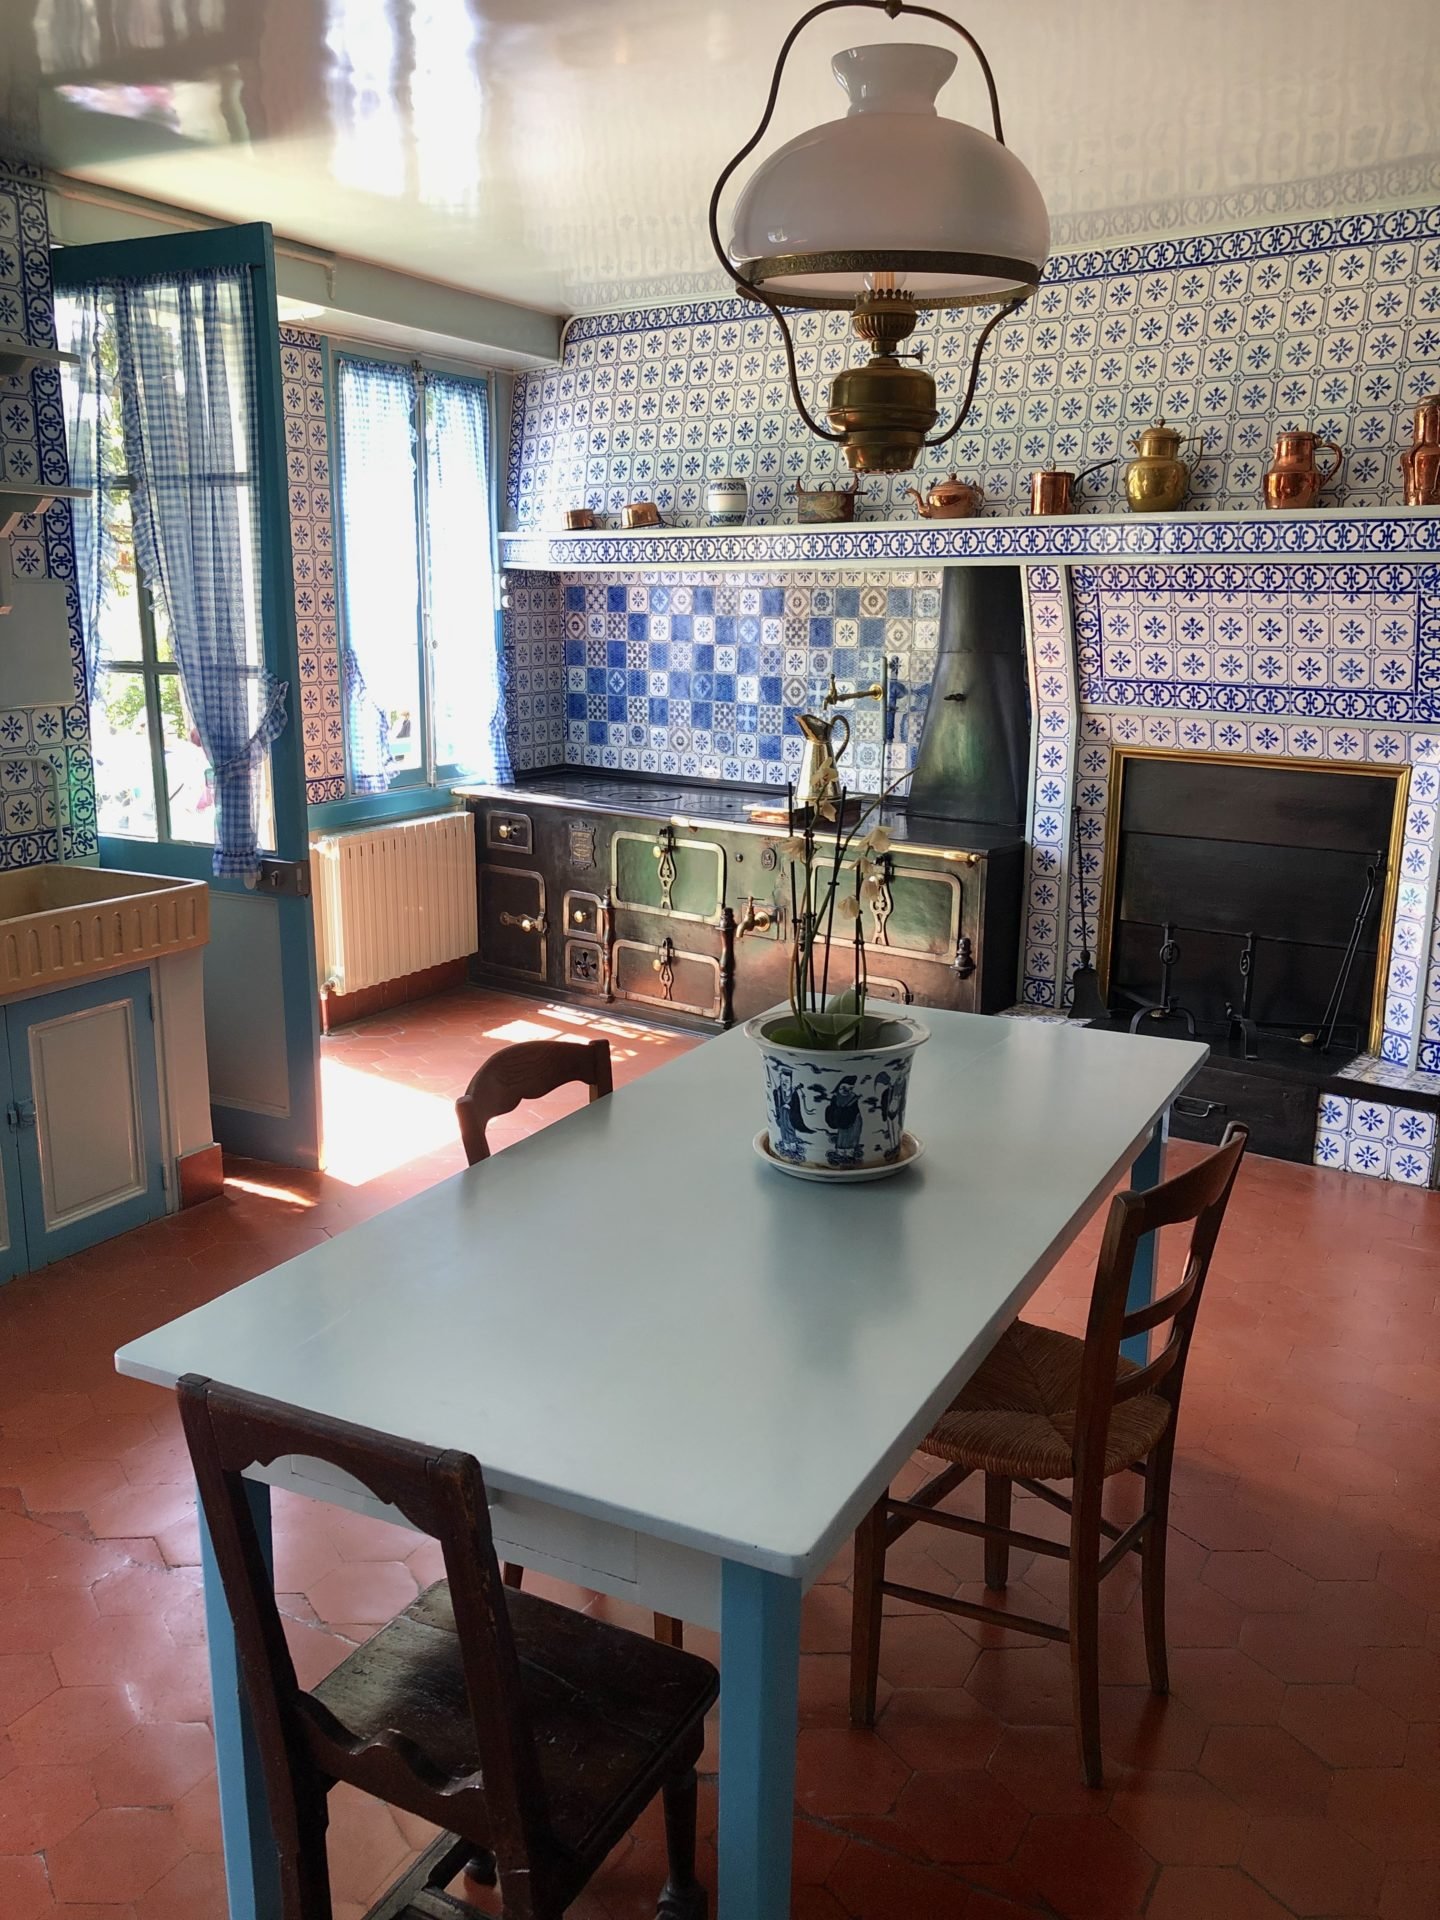 The Blue kitchen in the Monet House with tiles from Rouen. A huge oven sits in the corner.